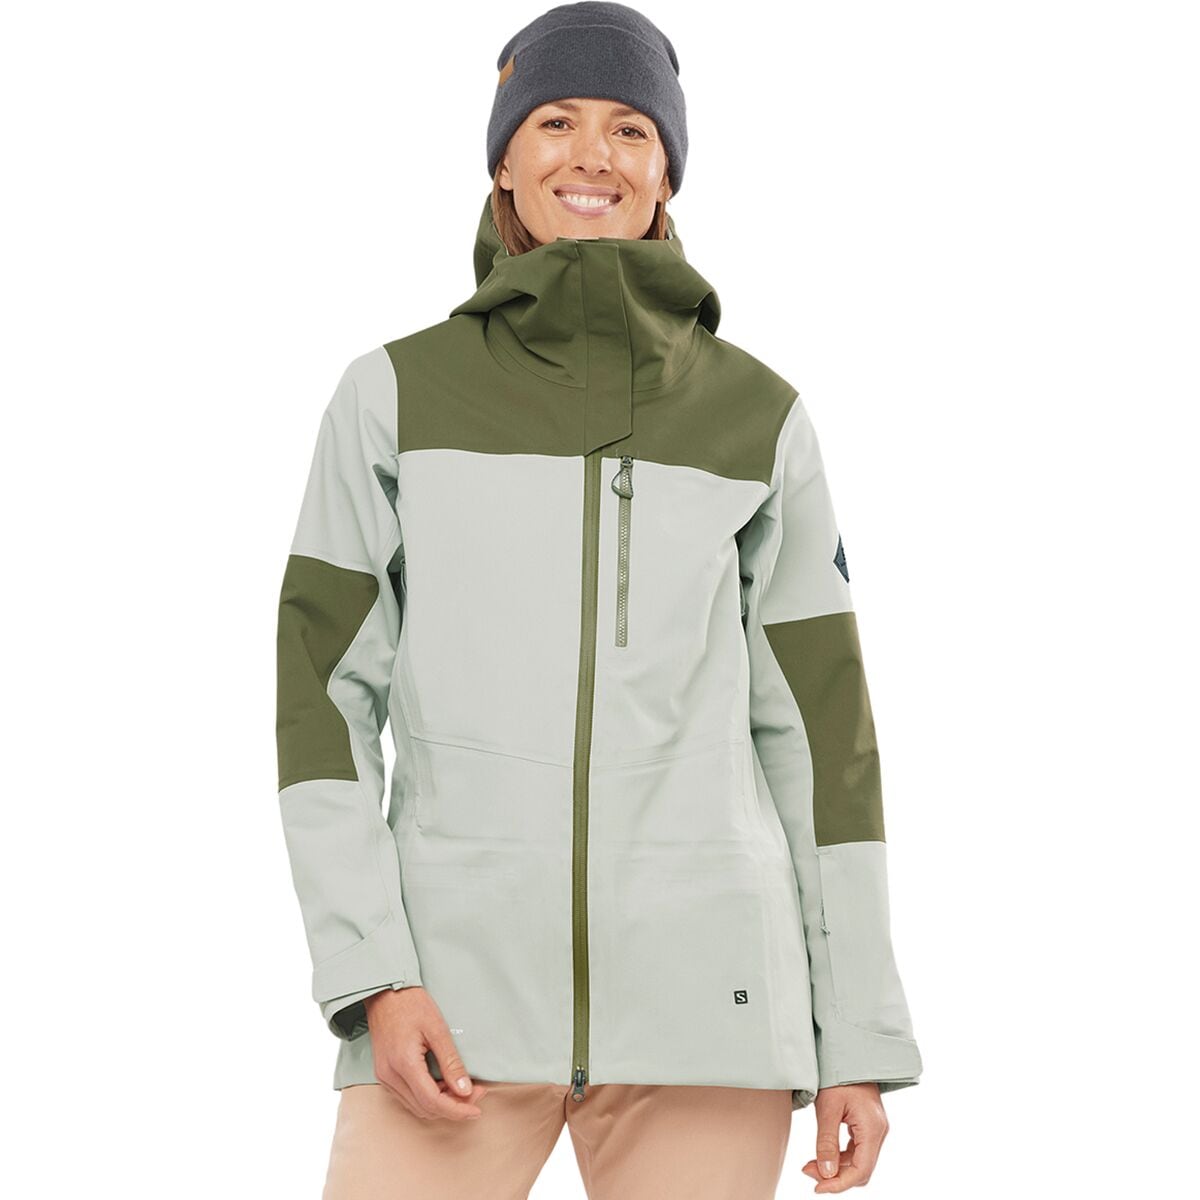 Screenplay Pick up leaves Bishop Salomon Stance 3 Layer Shell Jacket - Women's - Clothing